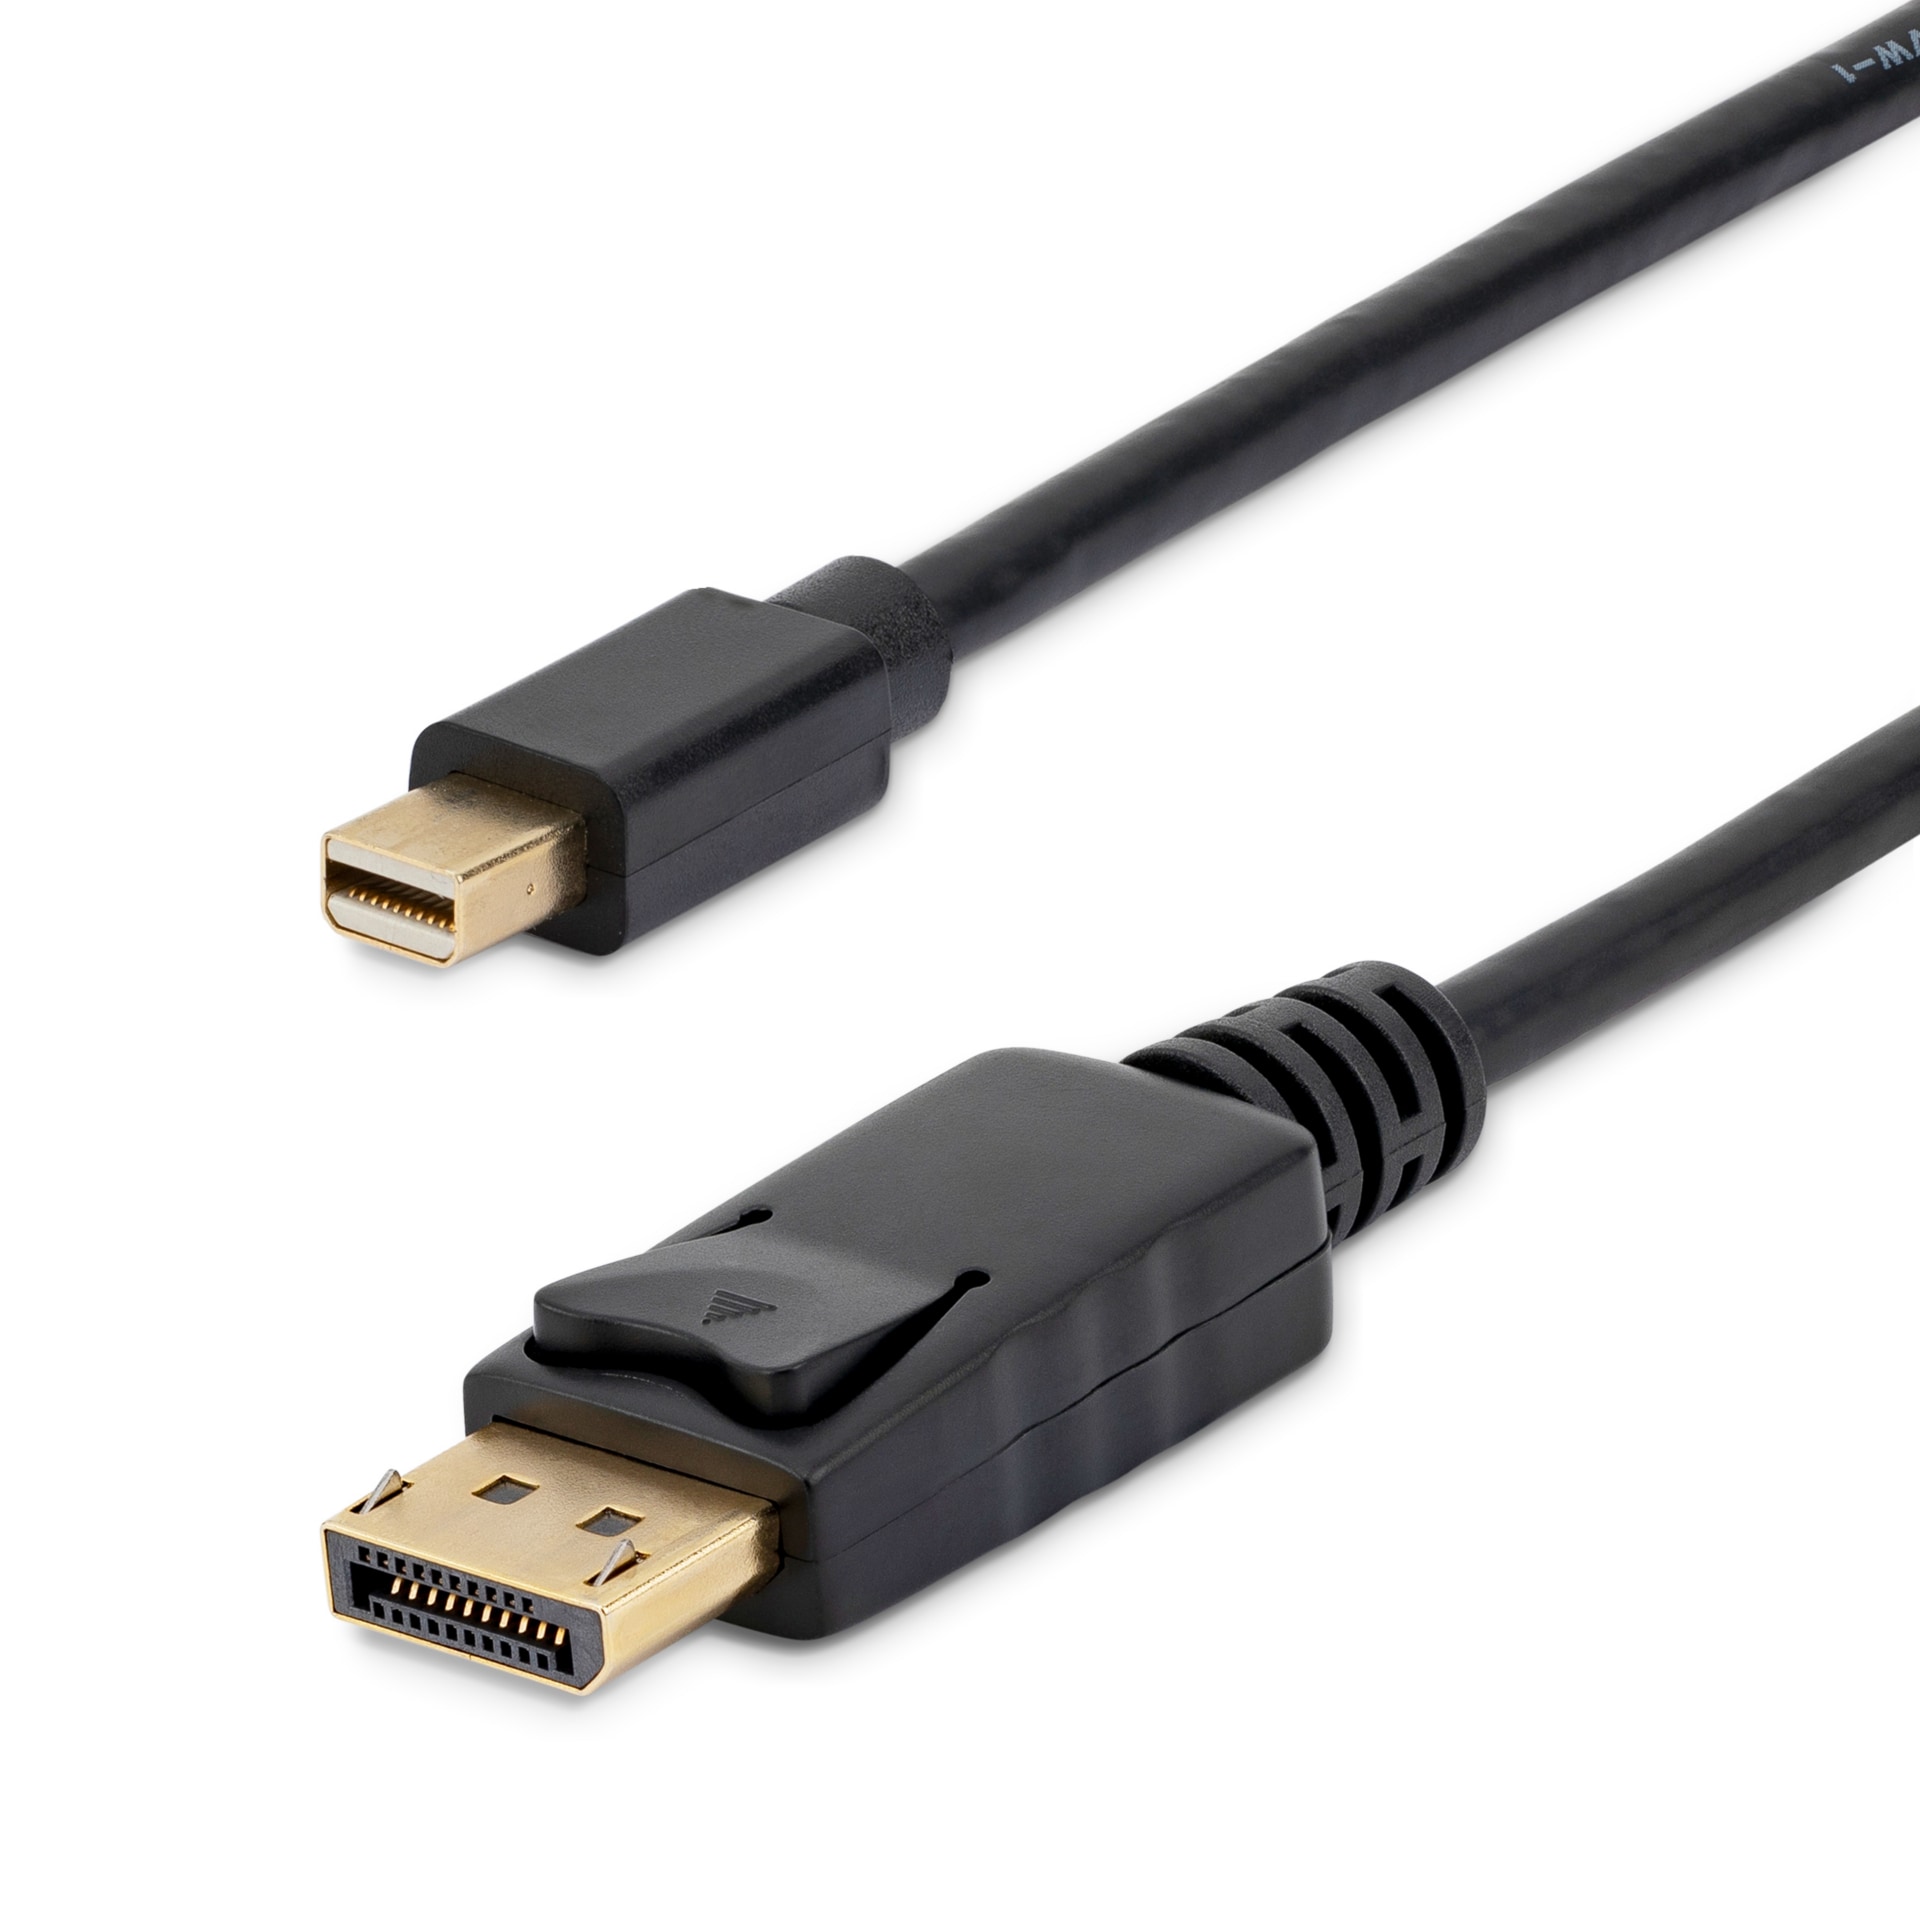 Mini DisplayPort (Thunderbolt) to HDMI - HDMI Adapters - Video Adapters -  Cables and Sockets